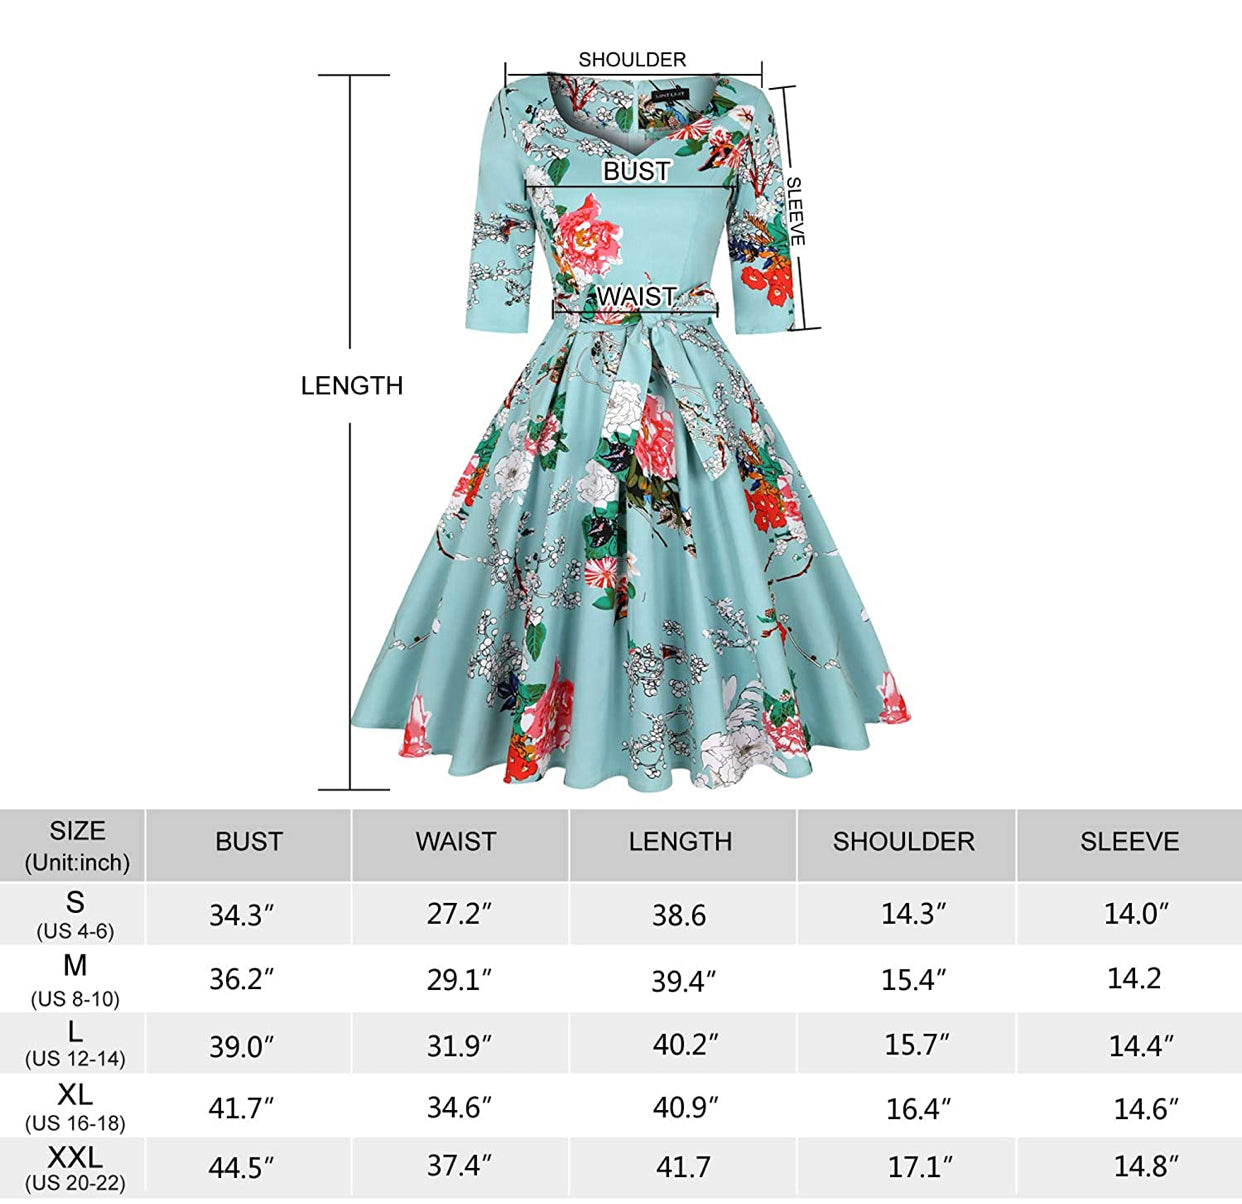 Sweetheart Neckline Rockability Floral Brown Dress, Sizes Small - 2XLarge (US Sized 4 - 22)